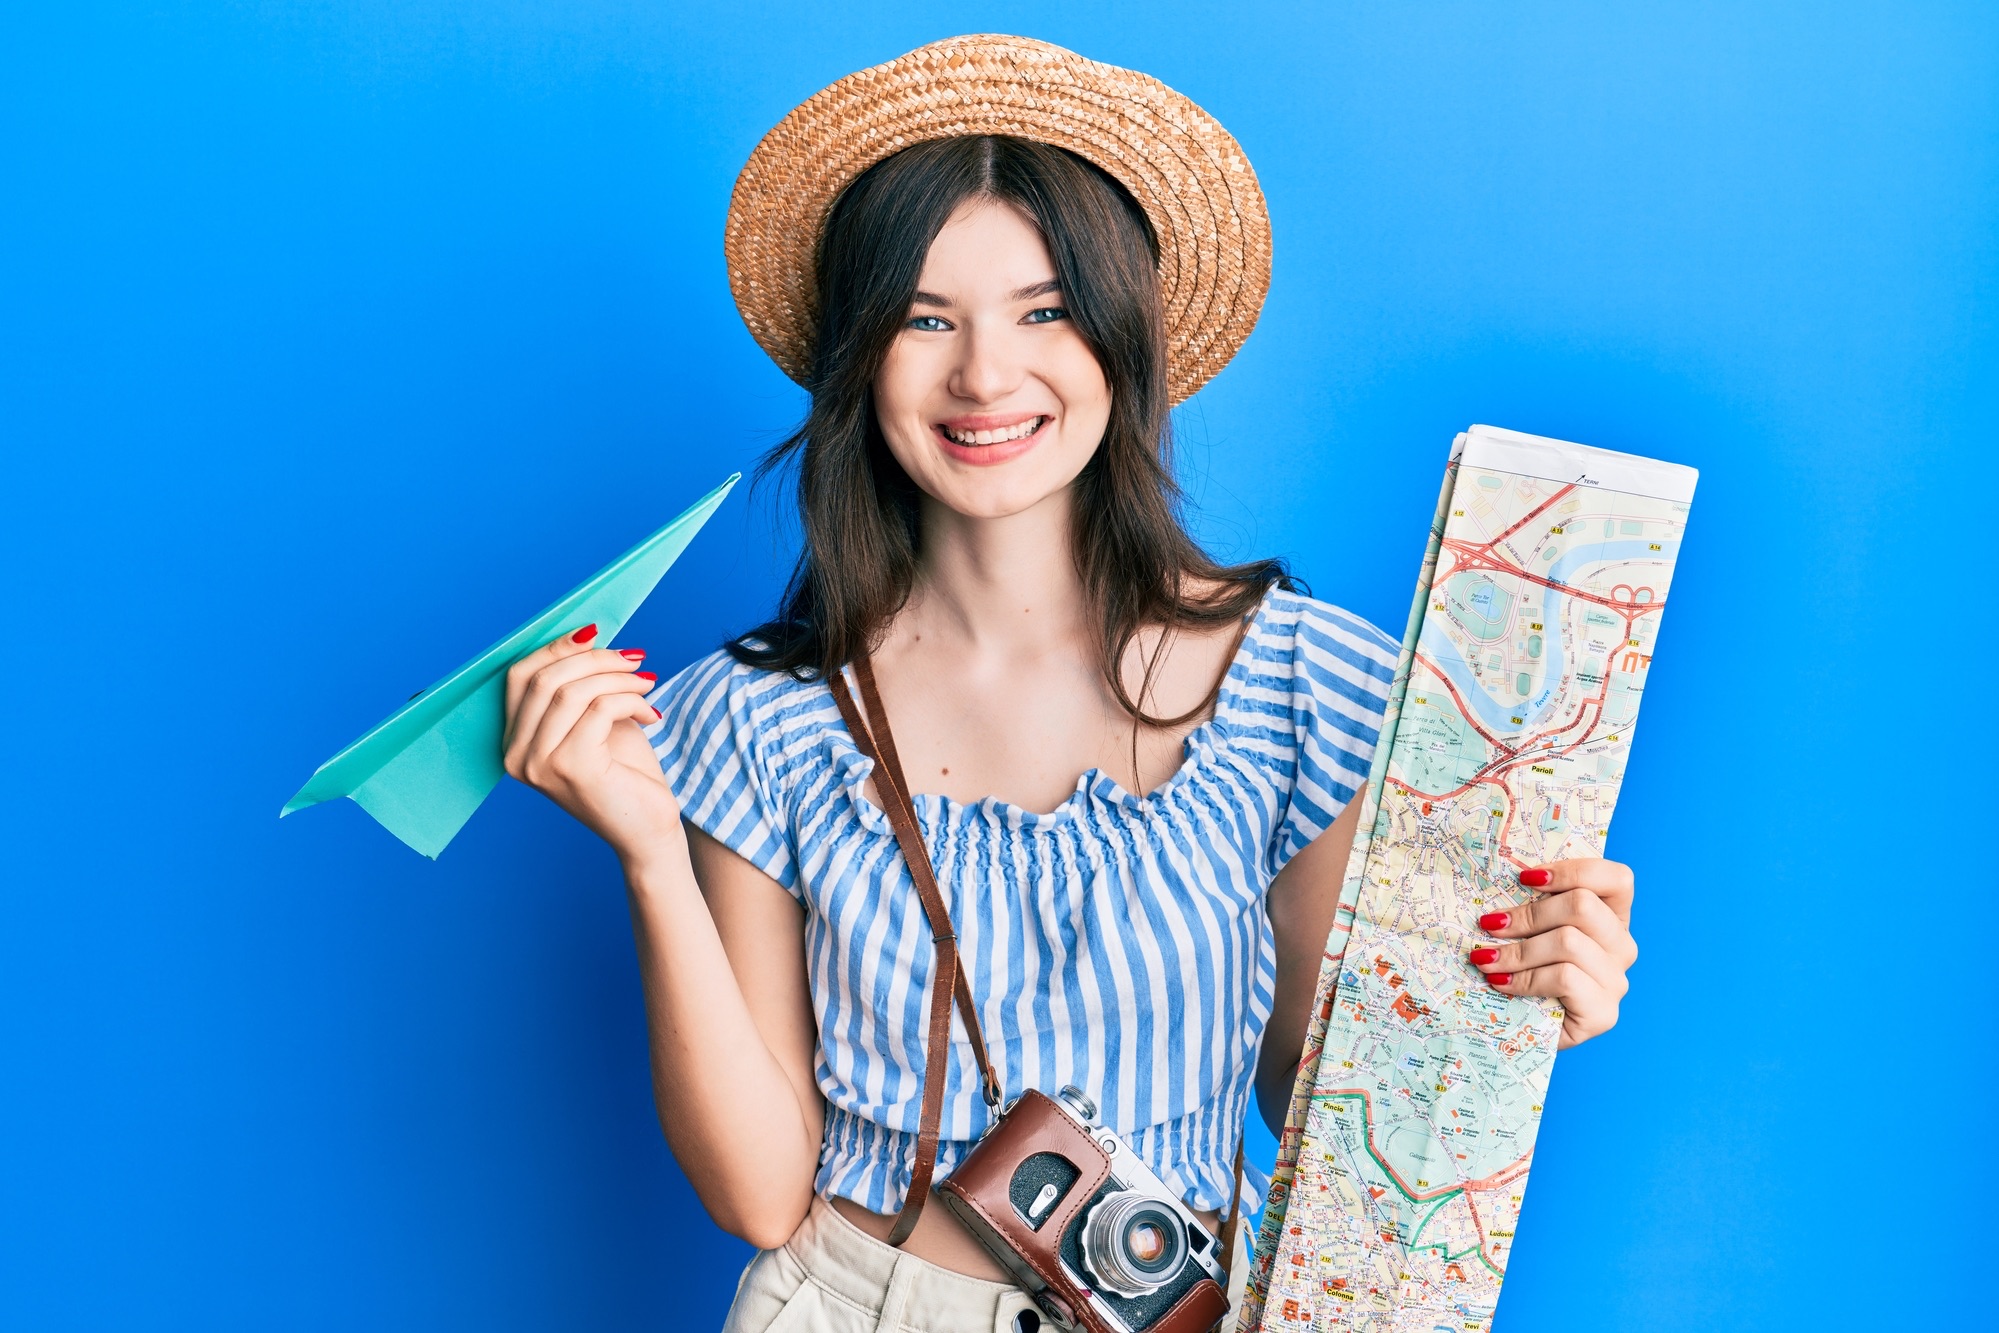 Young beautiful caucasian girl holding paper plane and city map smiling with a happy and cool smile on face. showing teeth.